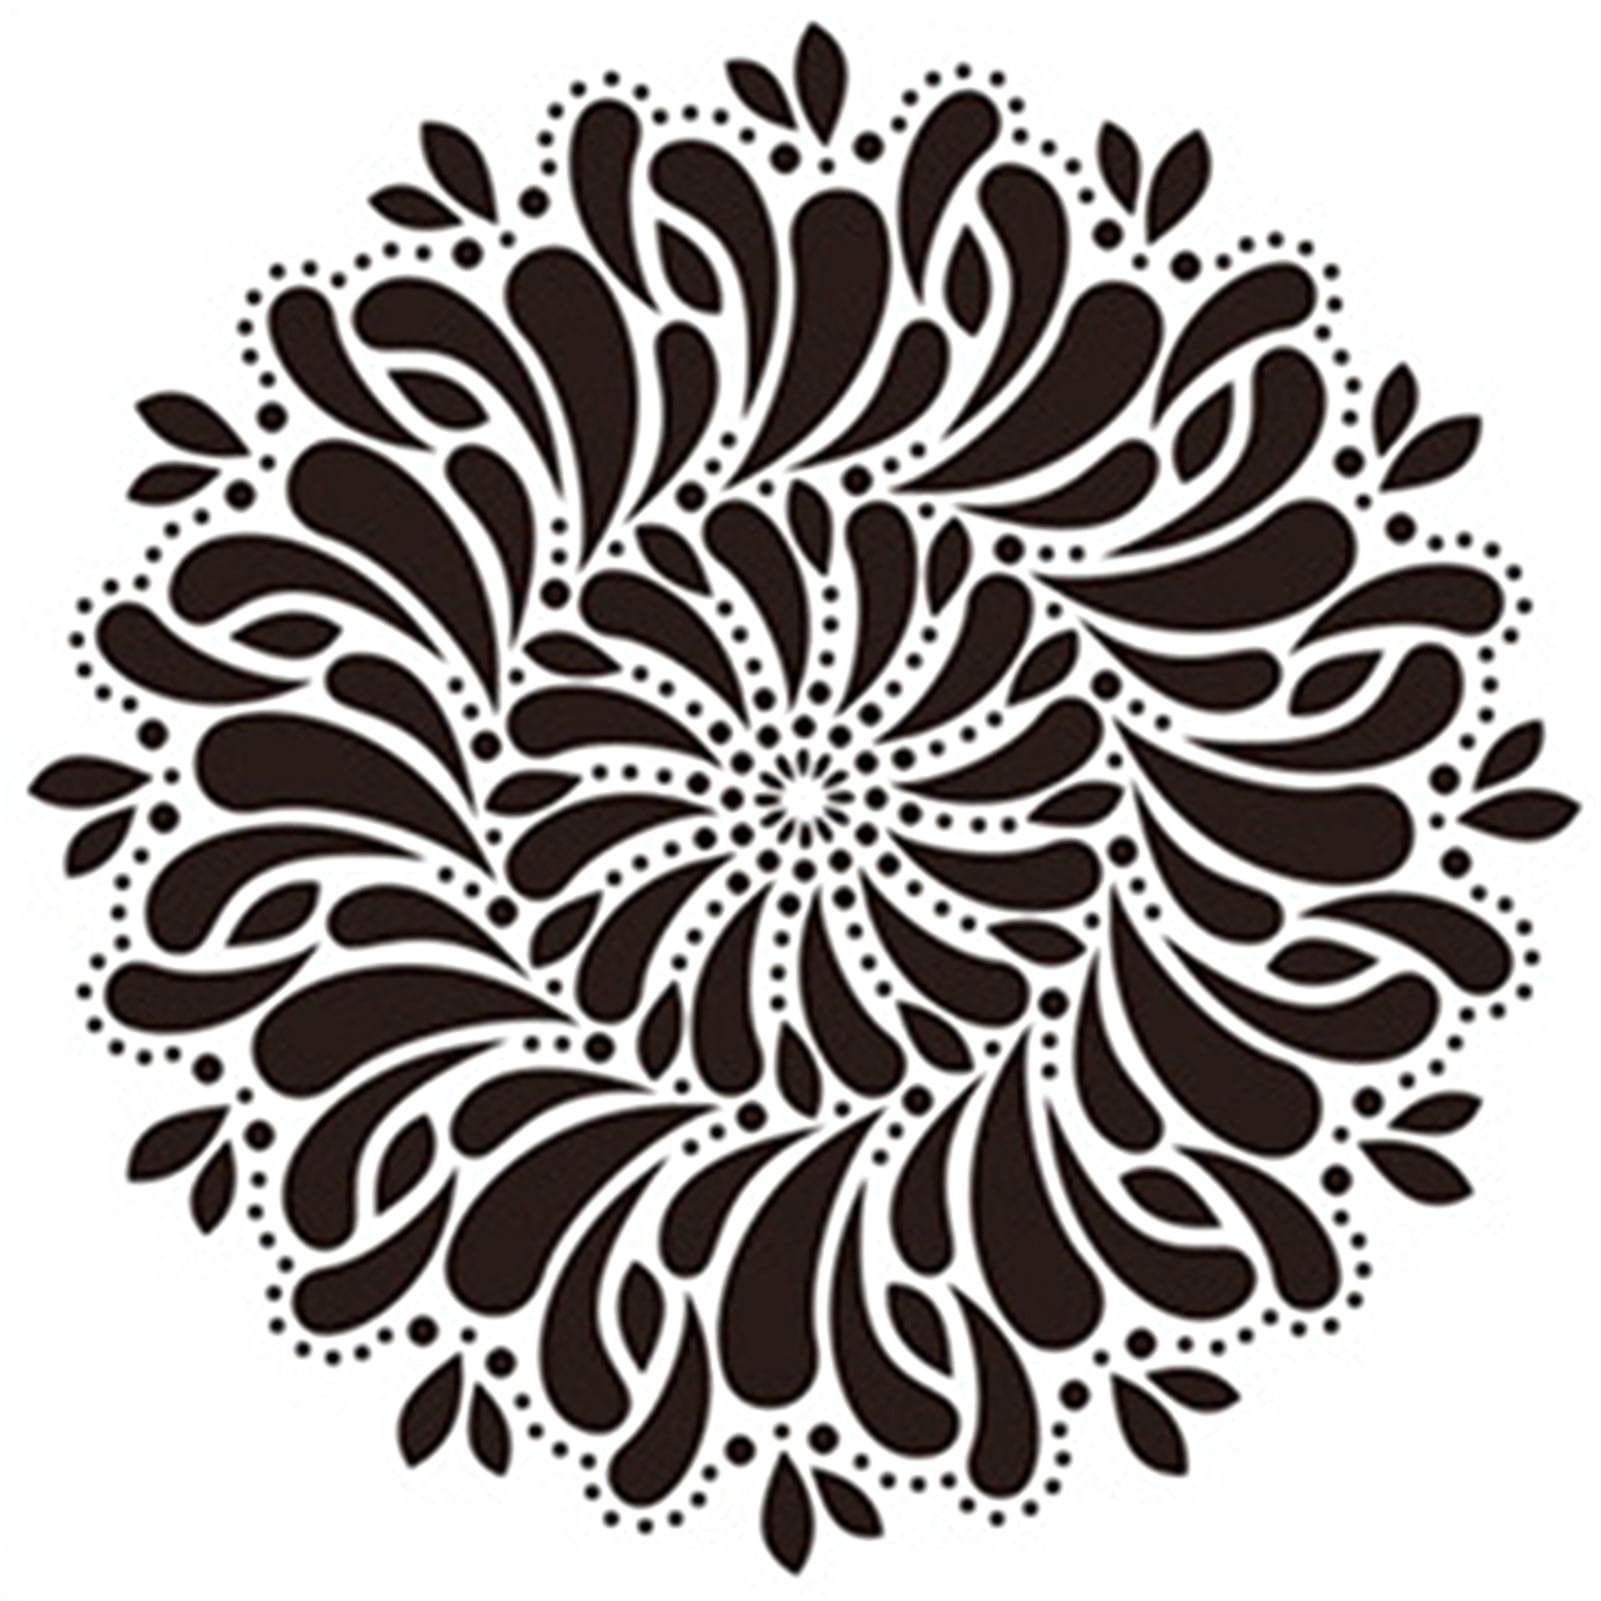 Stencils for Painting on Wood,Wall,Home Decor,20x20cm Mandala Leaves Ivy  DIY Reusable Stencils Painting Scrapbook Art Templates for Painting on